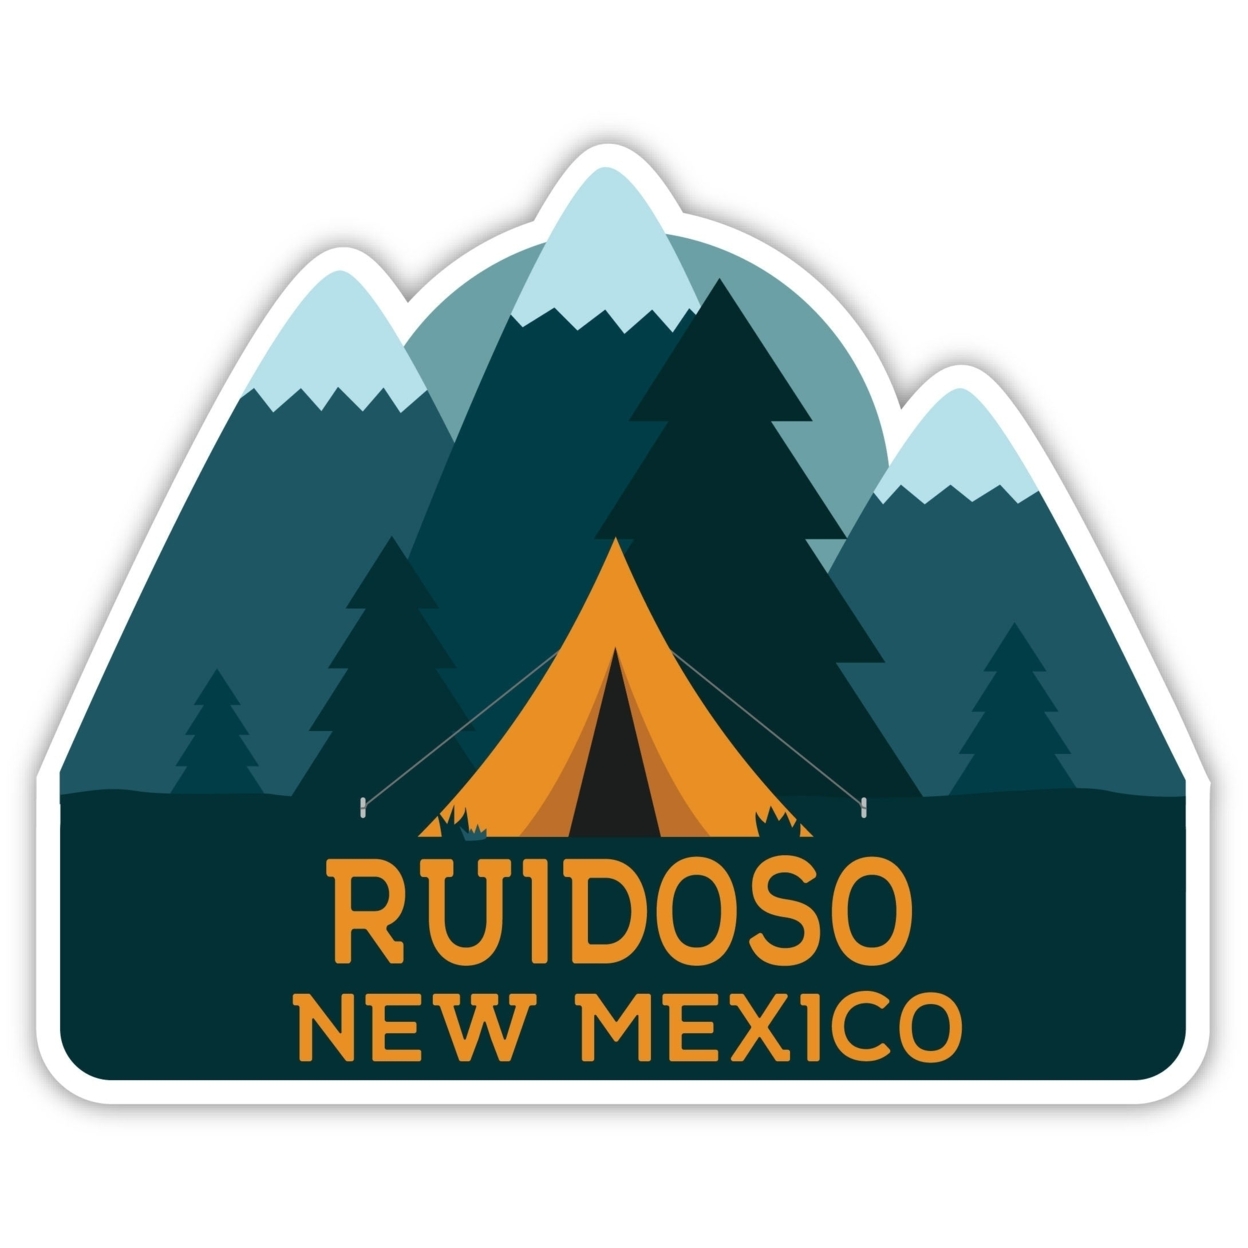 Ruidoso New Mexico Souvenir Decorative Stickers (Choose Theme And Size) - Single Unit, 2-Inch, Adventures Awaits